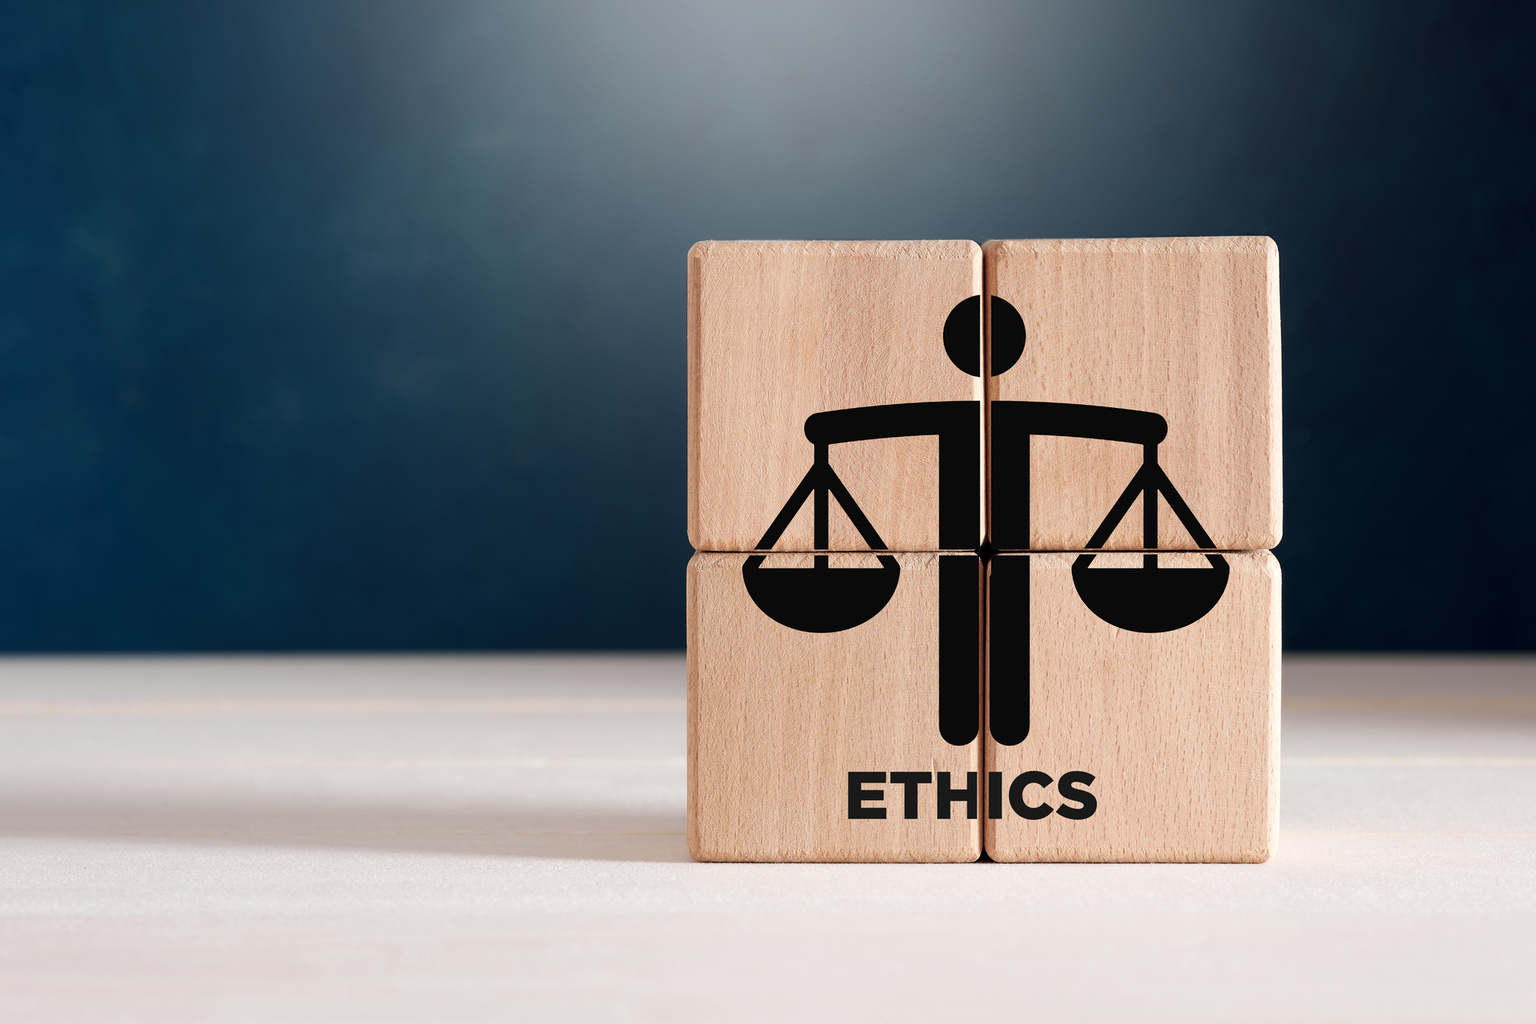 Business ethics or justice symbol on wooden cubes.